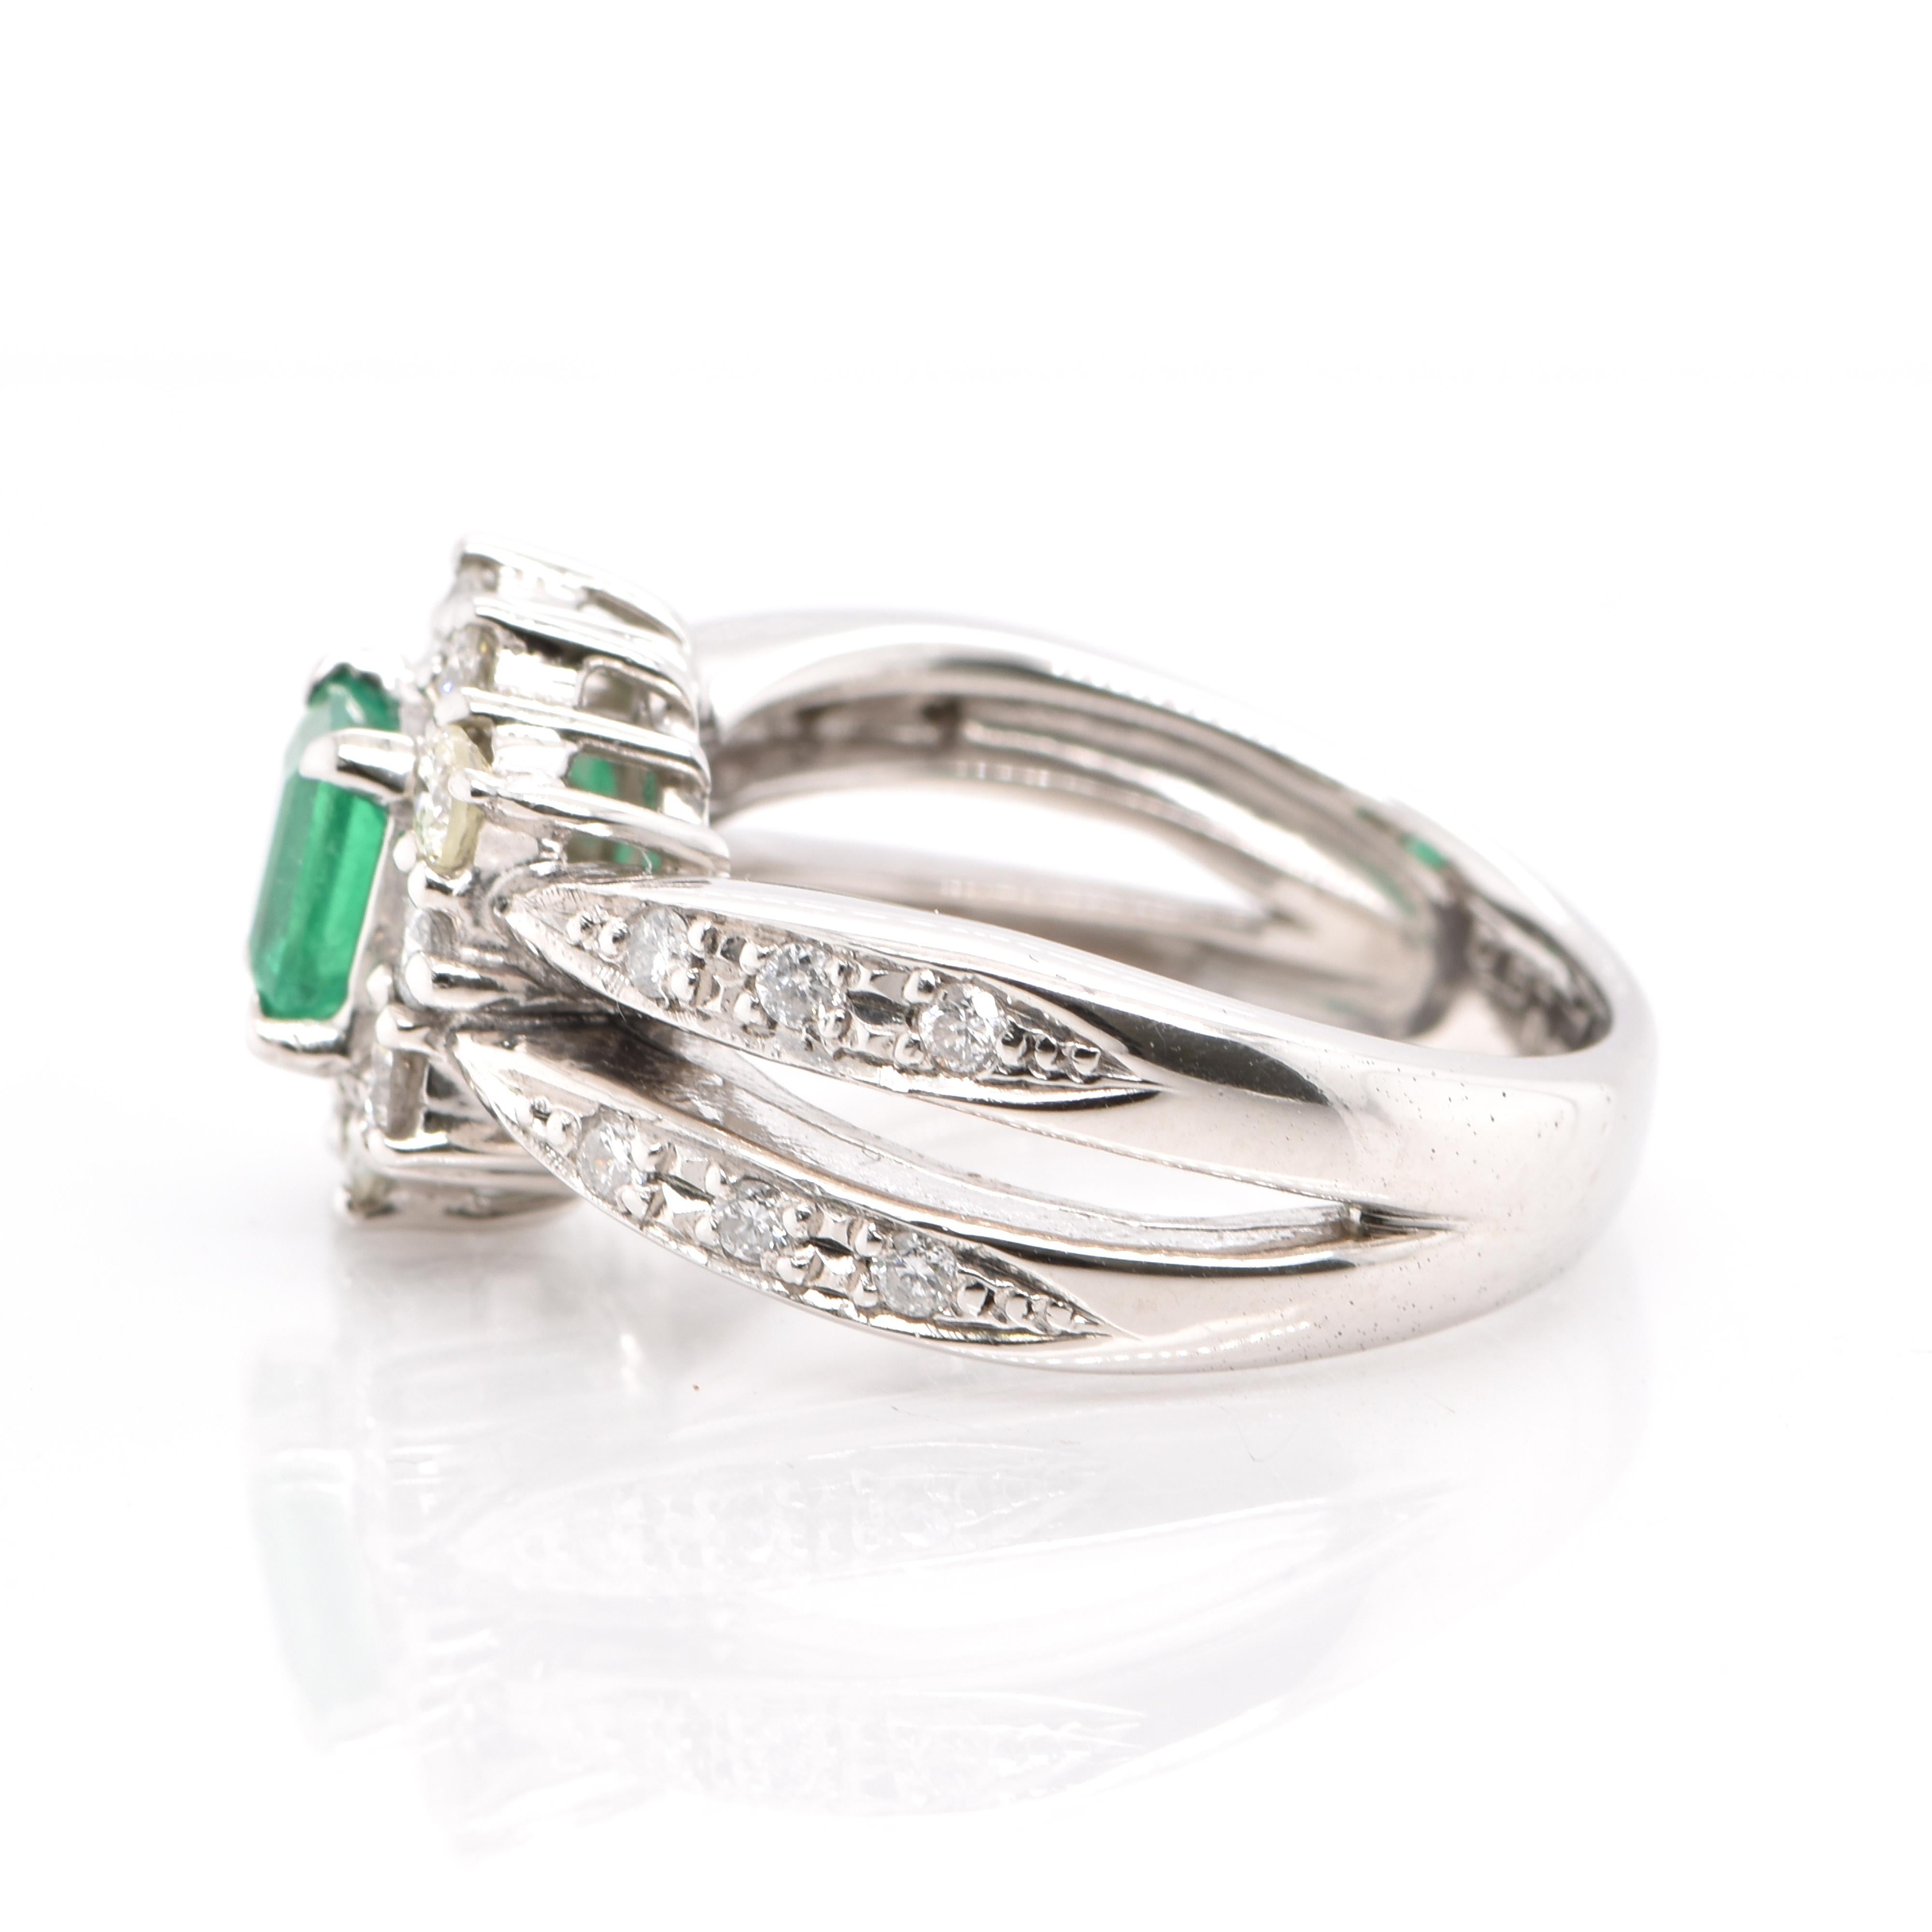 Emerald Cut 0.69 Carat Natural Emerald and Diamond Ring Set in Platinum For Sale